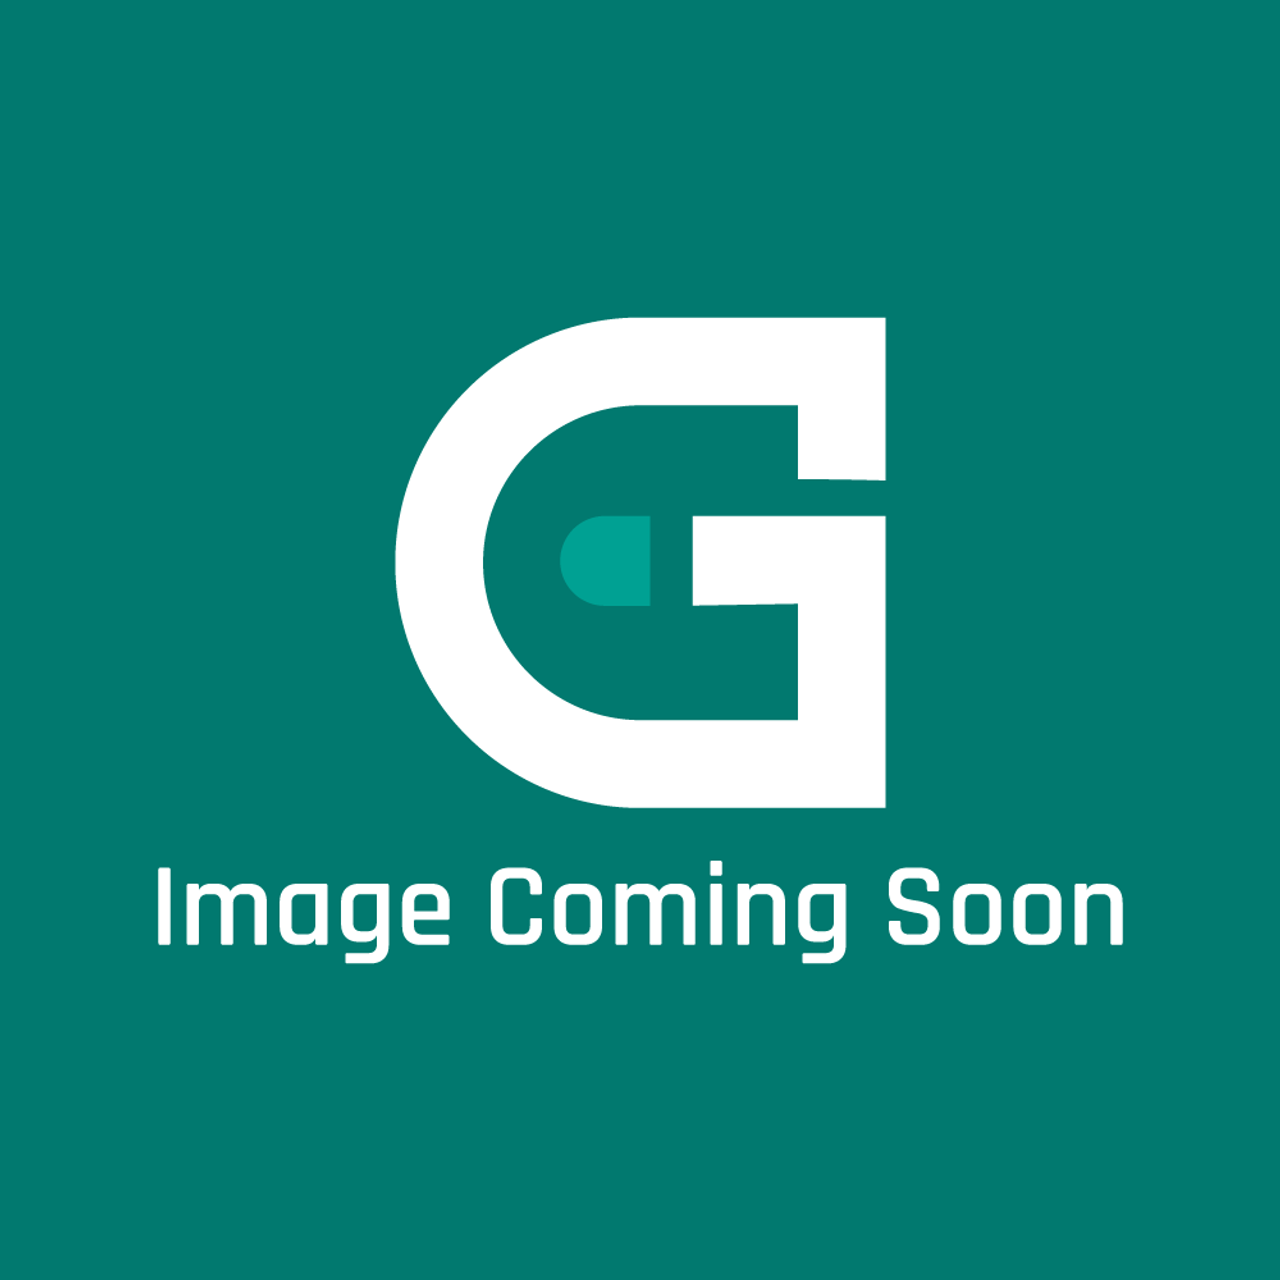 AGA Marvel A2985BLK - Lh Side Plate Module Blk - Image Coming Soon!